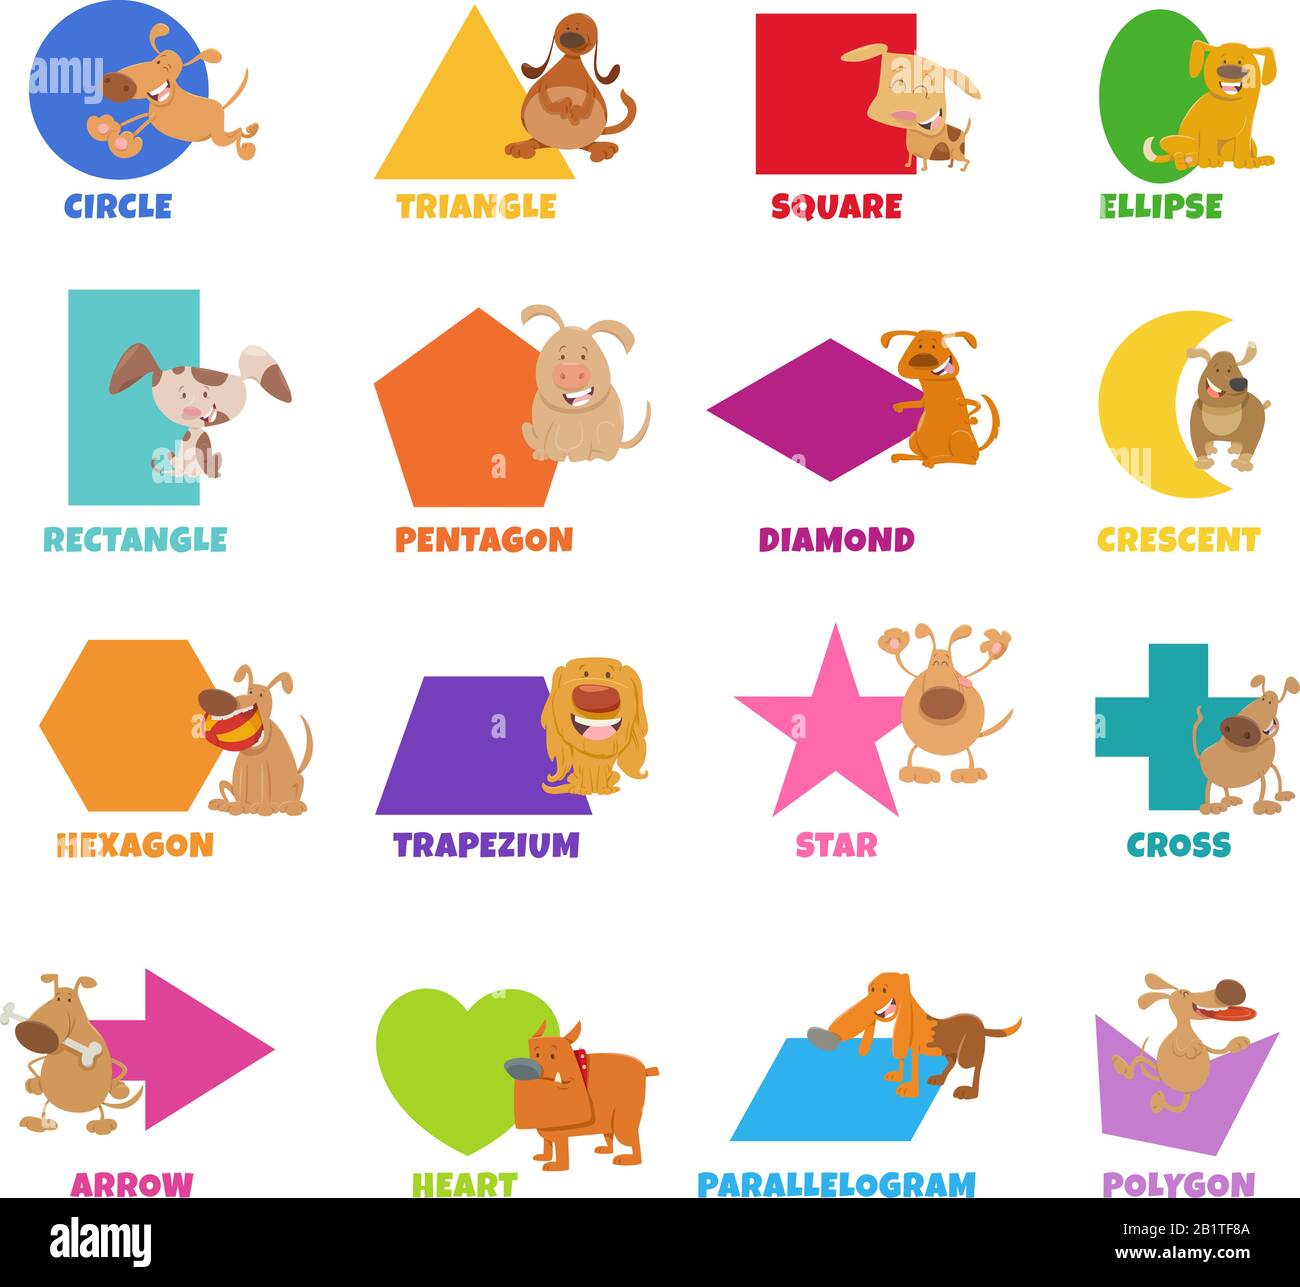 Educational Cartoon Illustration of Basic Geometric Shapes with Captions and Dogs and Welpies Animal Characters for Preschool and Elementary Age Child Stock Vektor